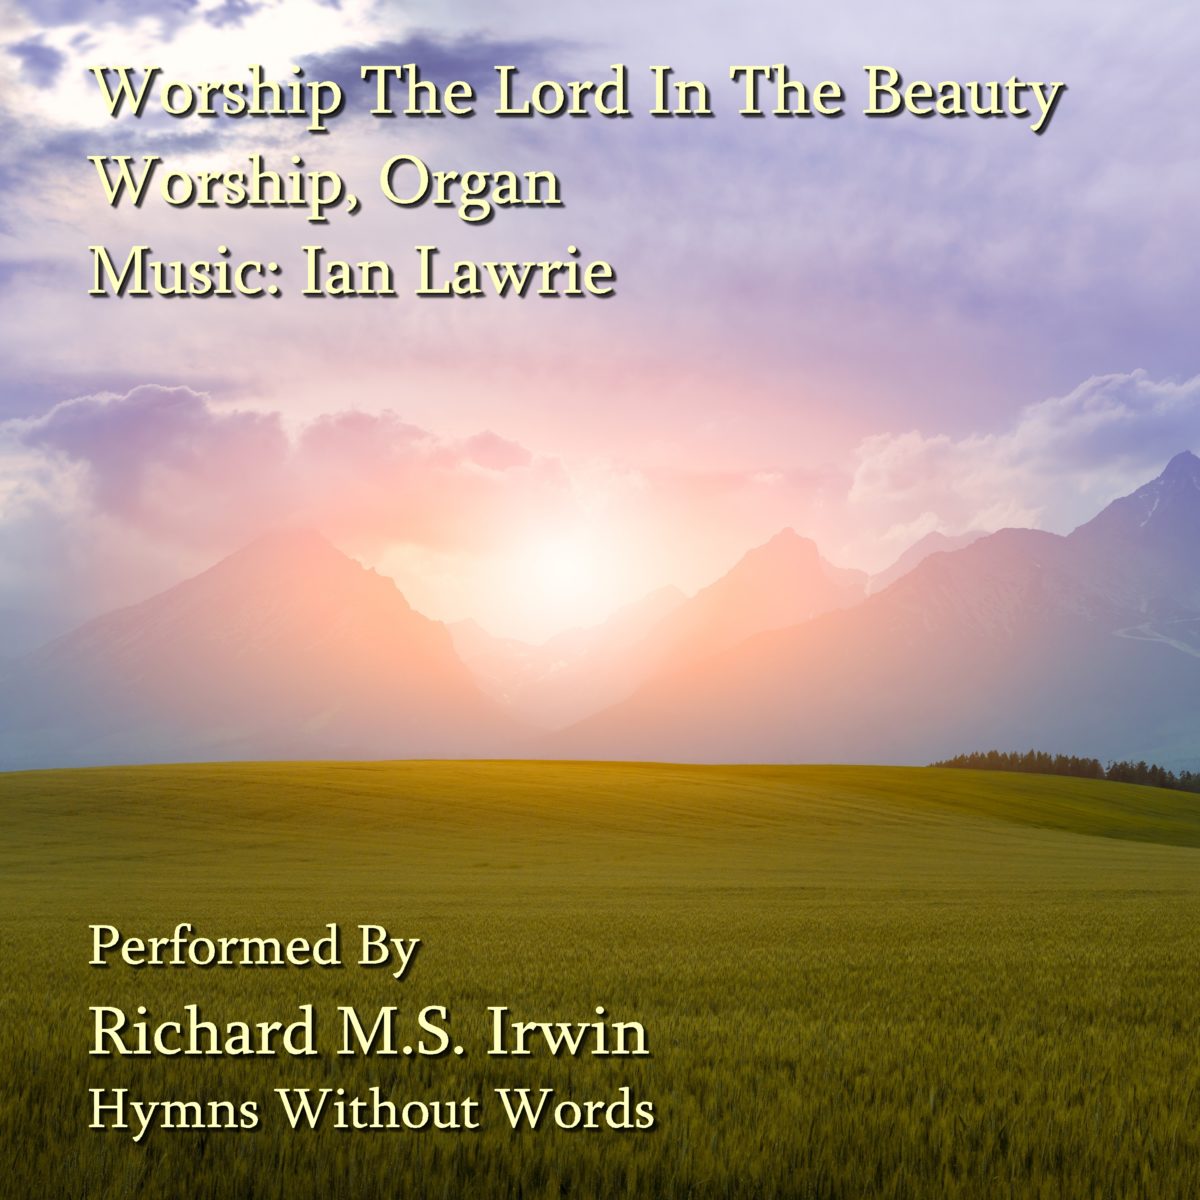 O Worship The Lord In The Beauty Of Holiness